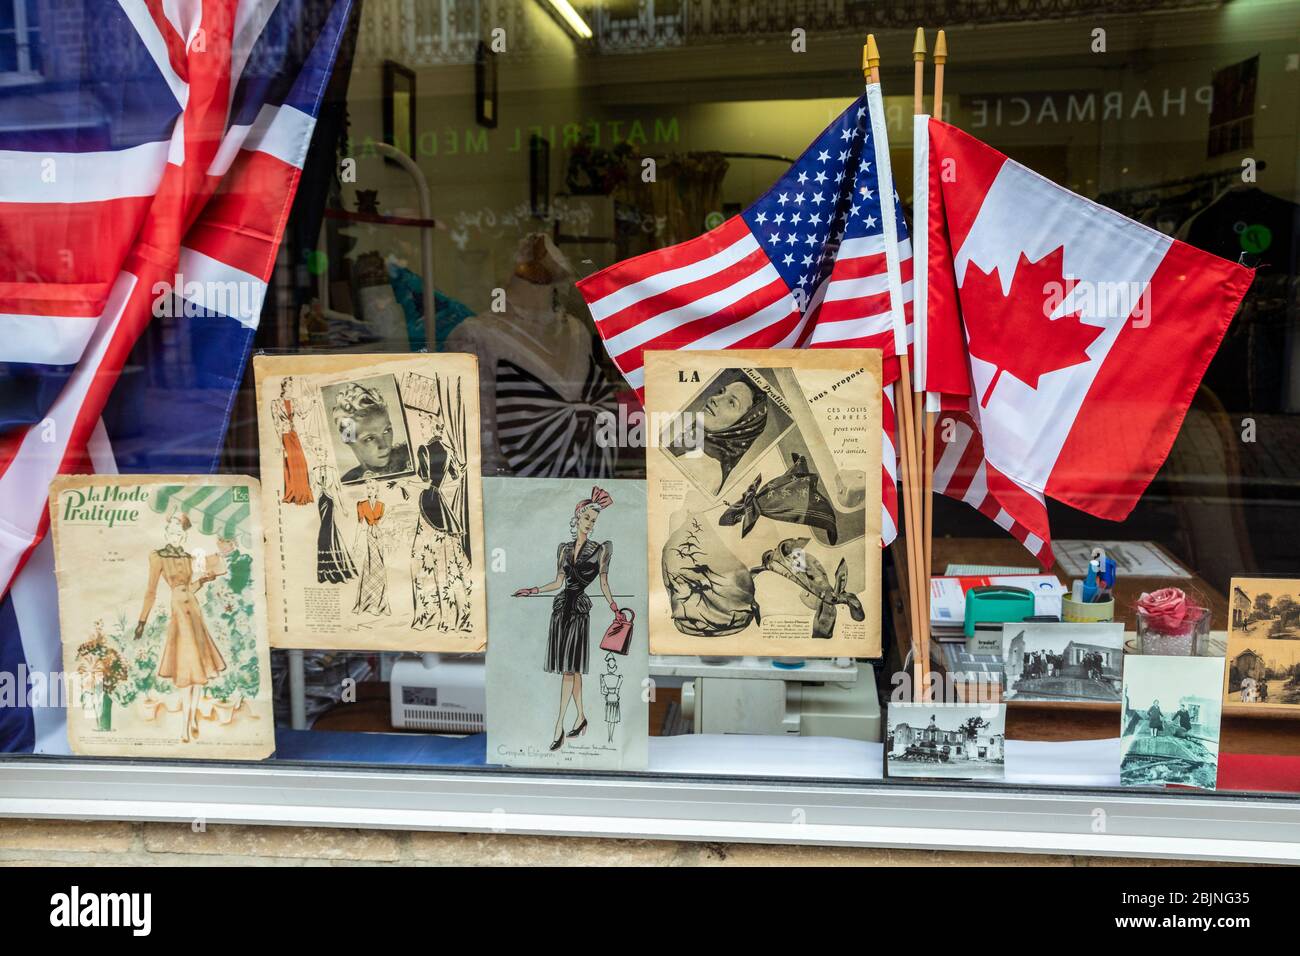 Window decorations for the 75th anniversary of D-Day, Carentan, Normandy, France Stock Photo